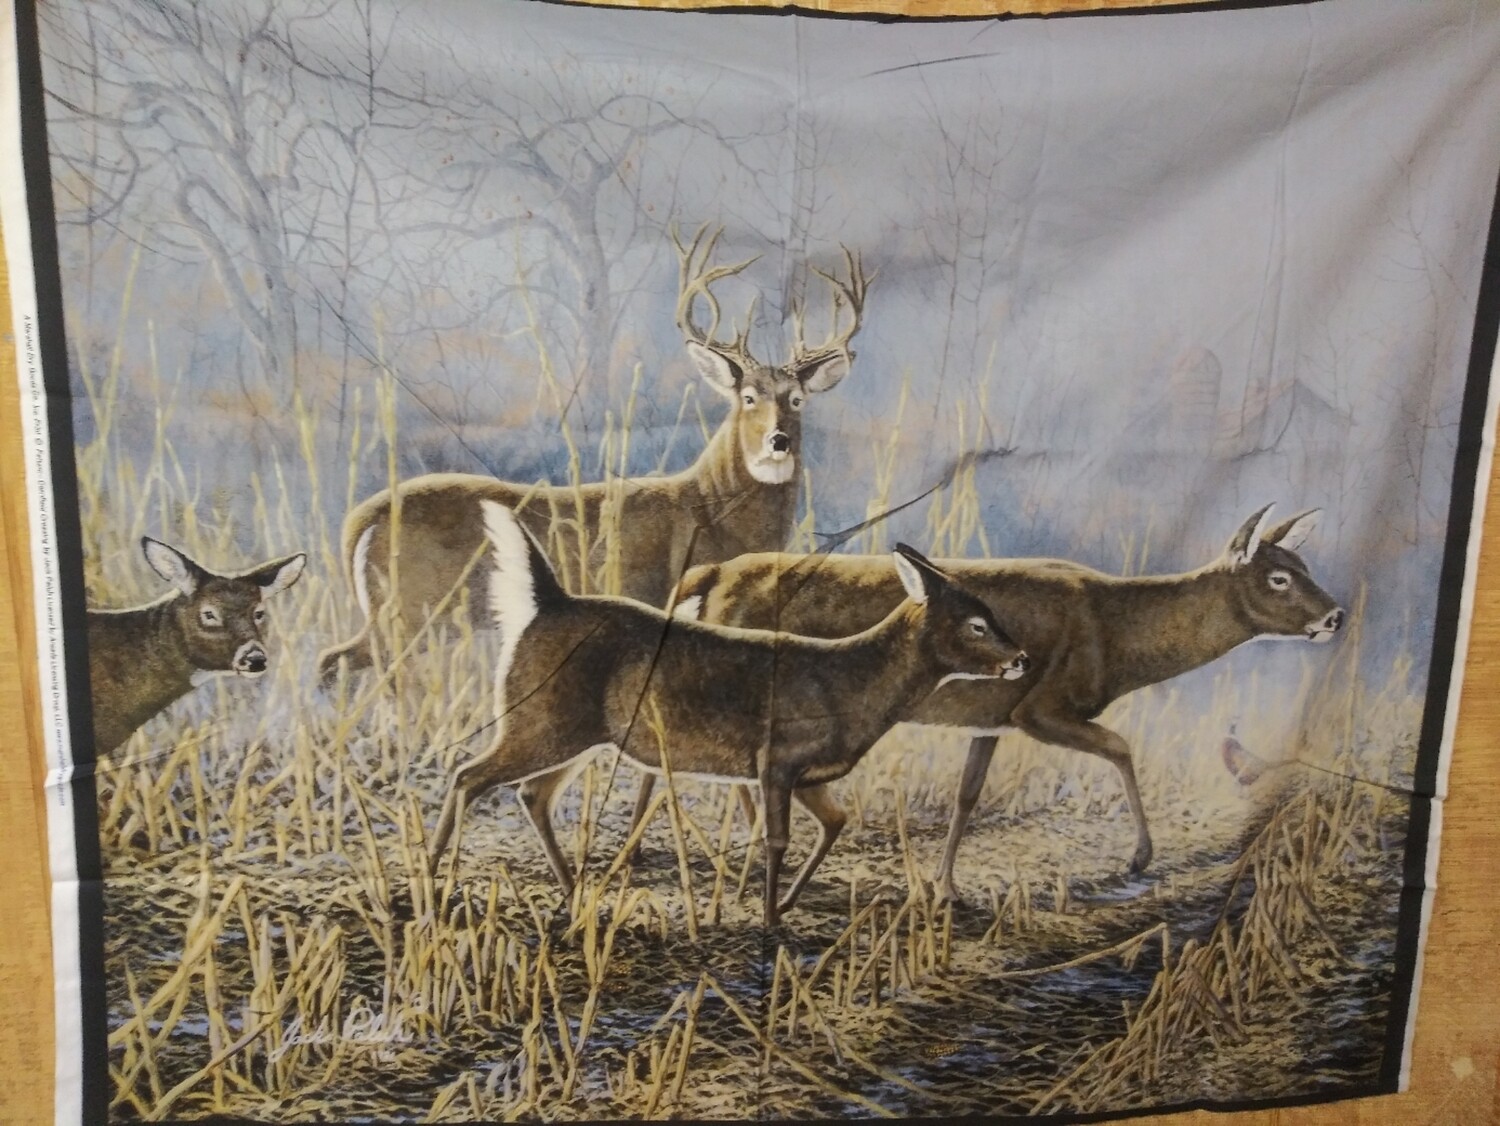 Cornfield Crossing by Jack Paluh for Marshall Dry Goods 36" x 44"